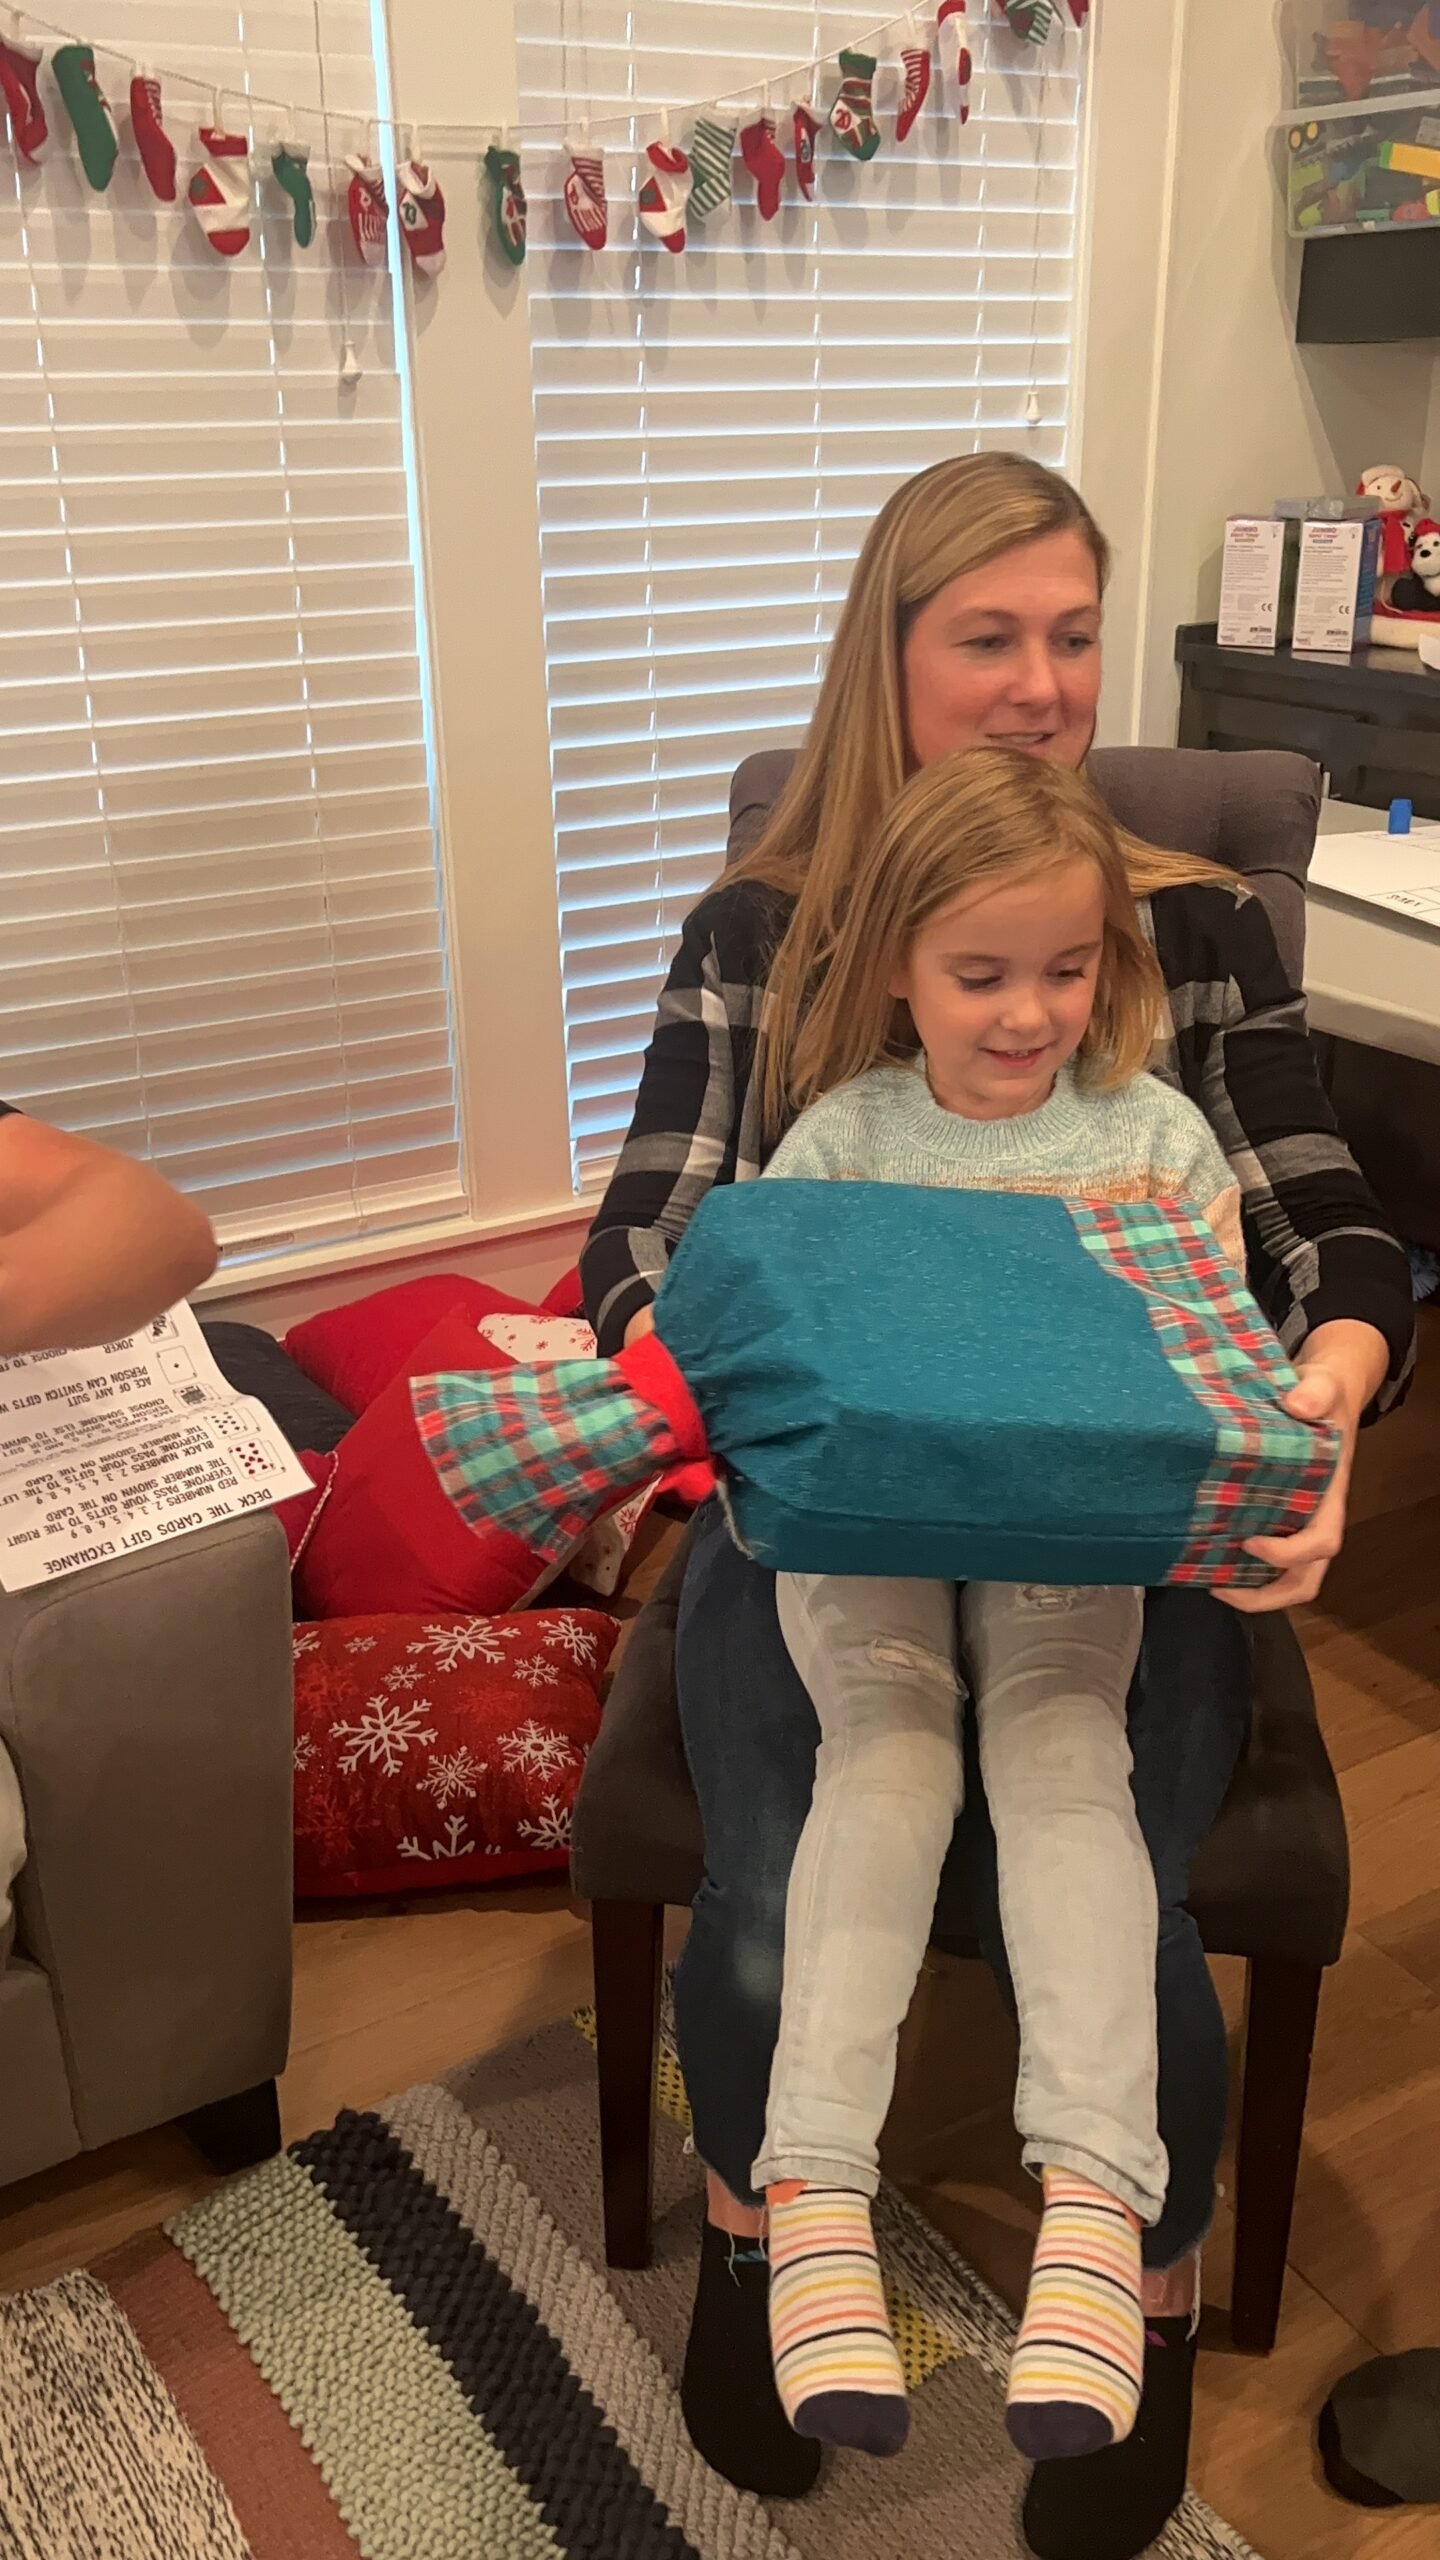 mom and daughter sitting with a gift in their lap